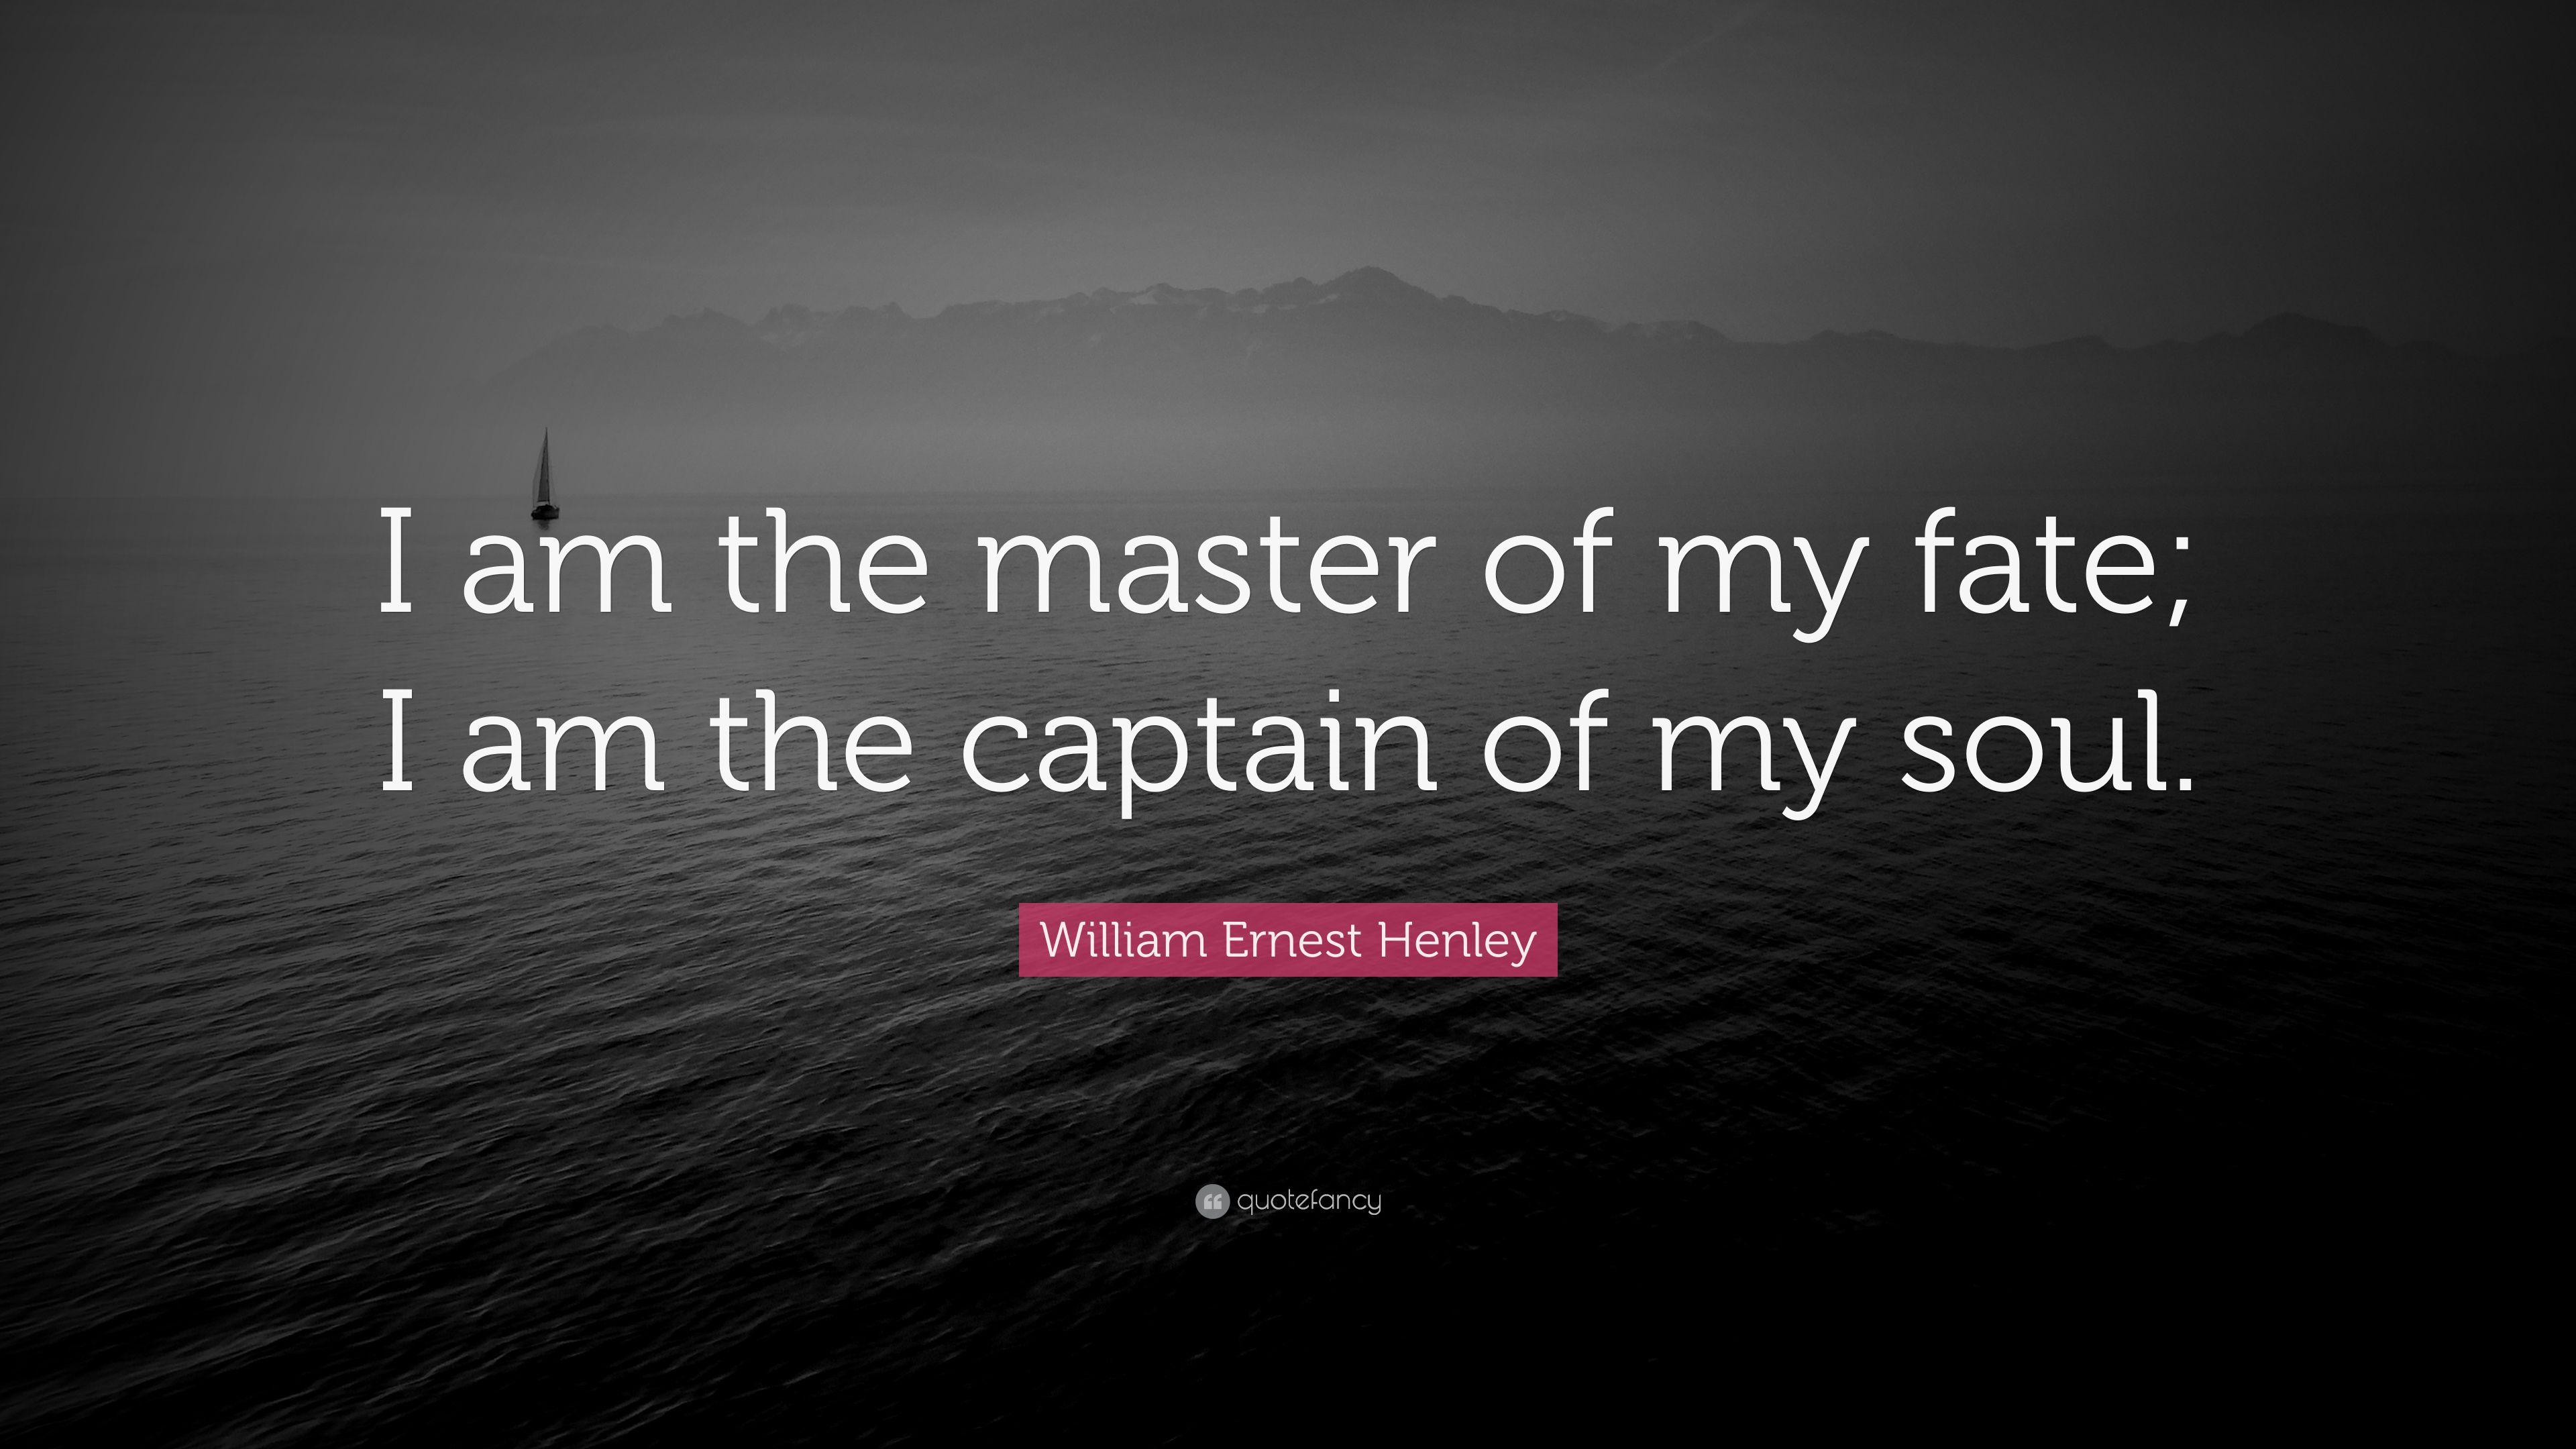 William Ernest Henley Quote: “I am the master of my fate; I am